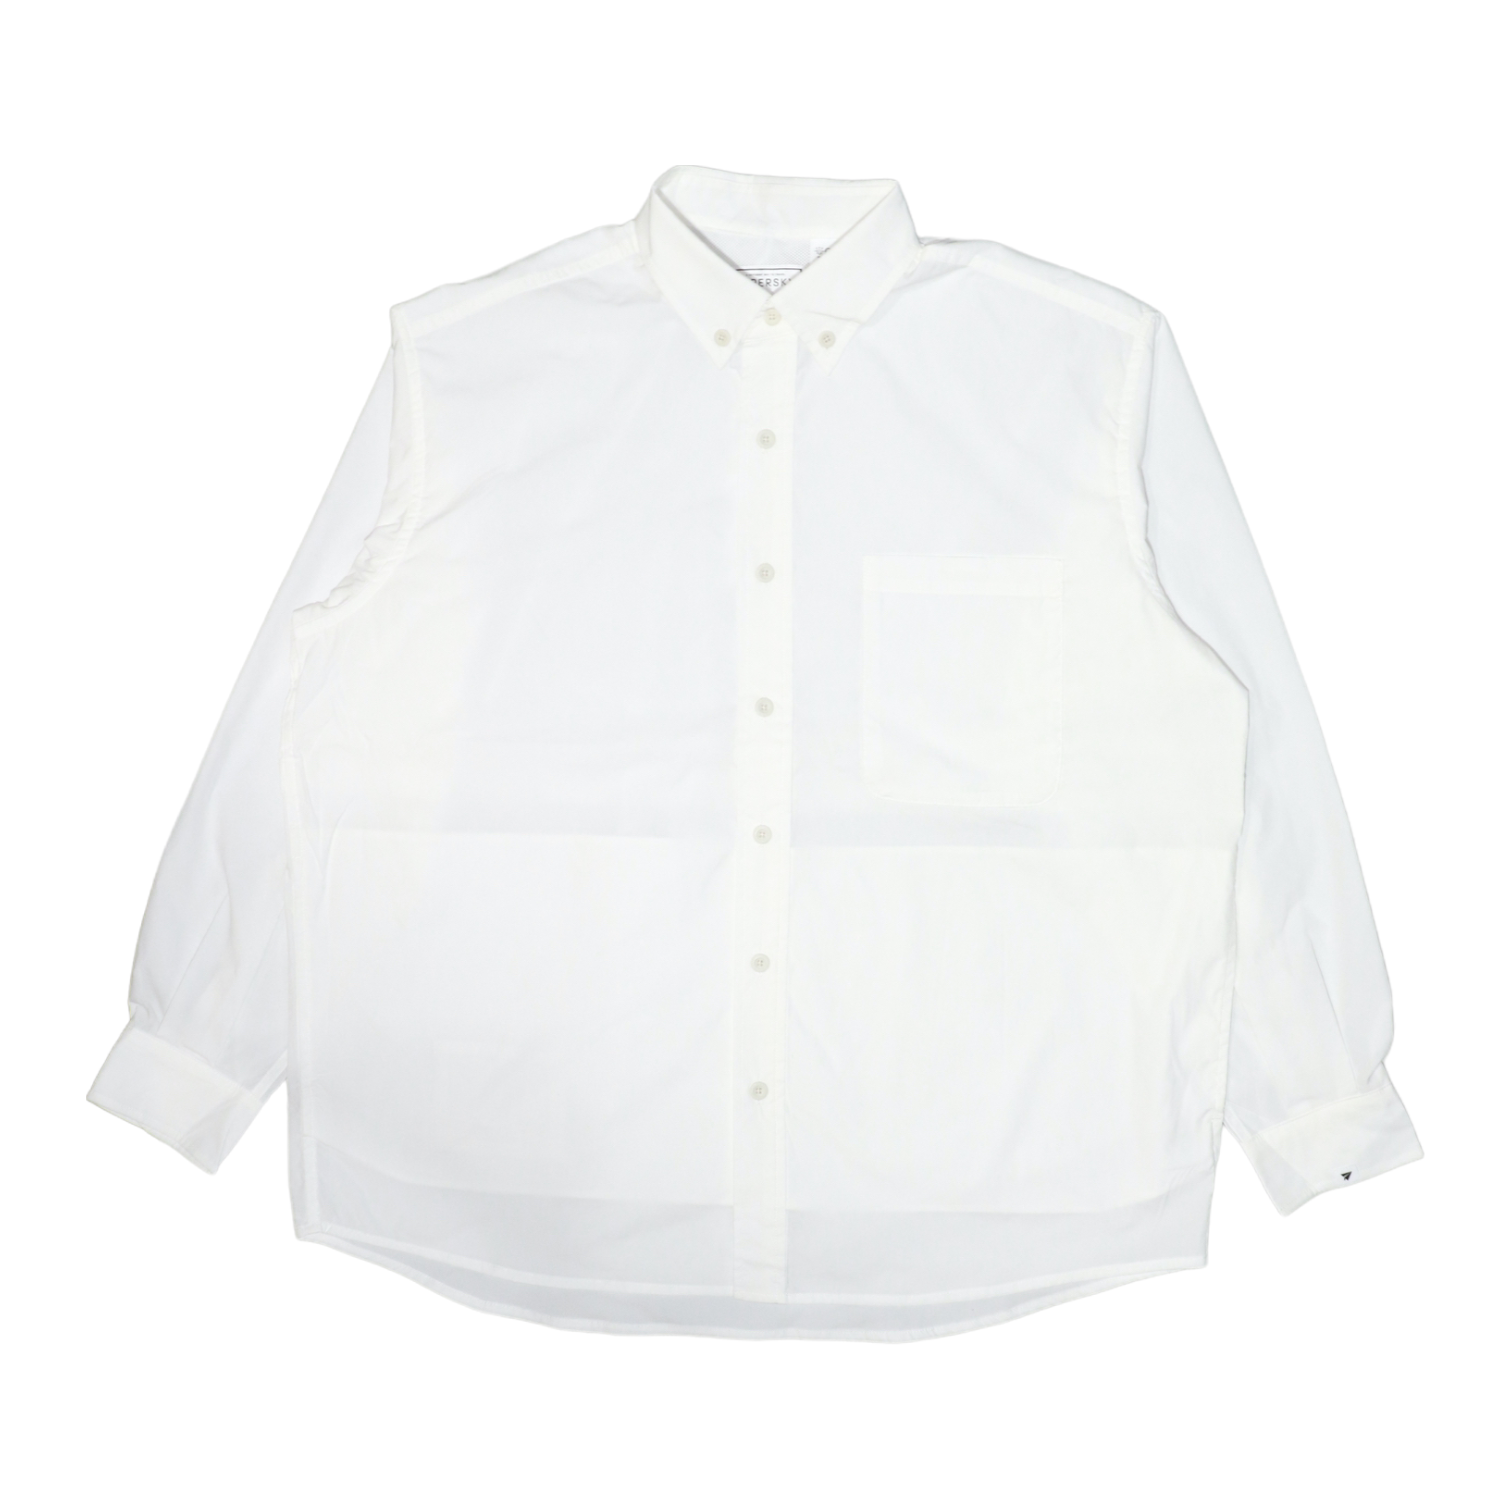 <img class='new_mark_img1' src='https://img.shop-pro.jp/img/new/icons14.gif' style='border:none;display:inline;margin:0px;padding:0px;width:auto;' />HIKE&BIKE CAVE BIG SHIRTS (WHITE)